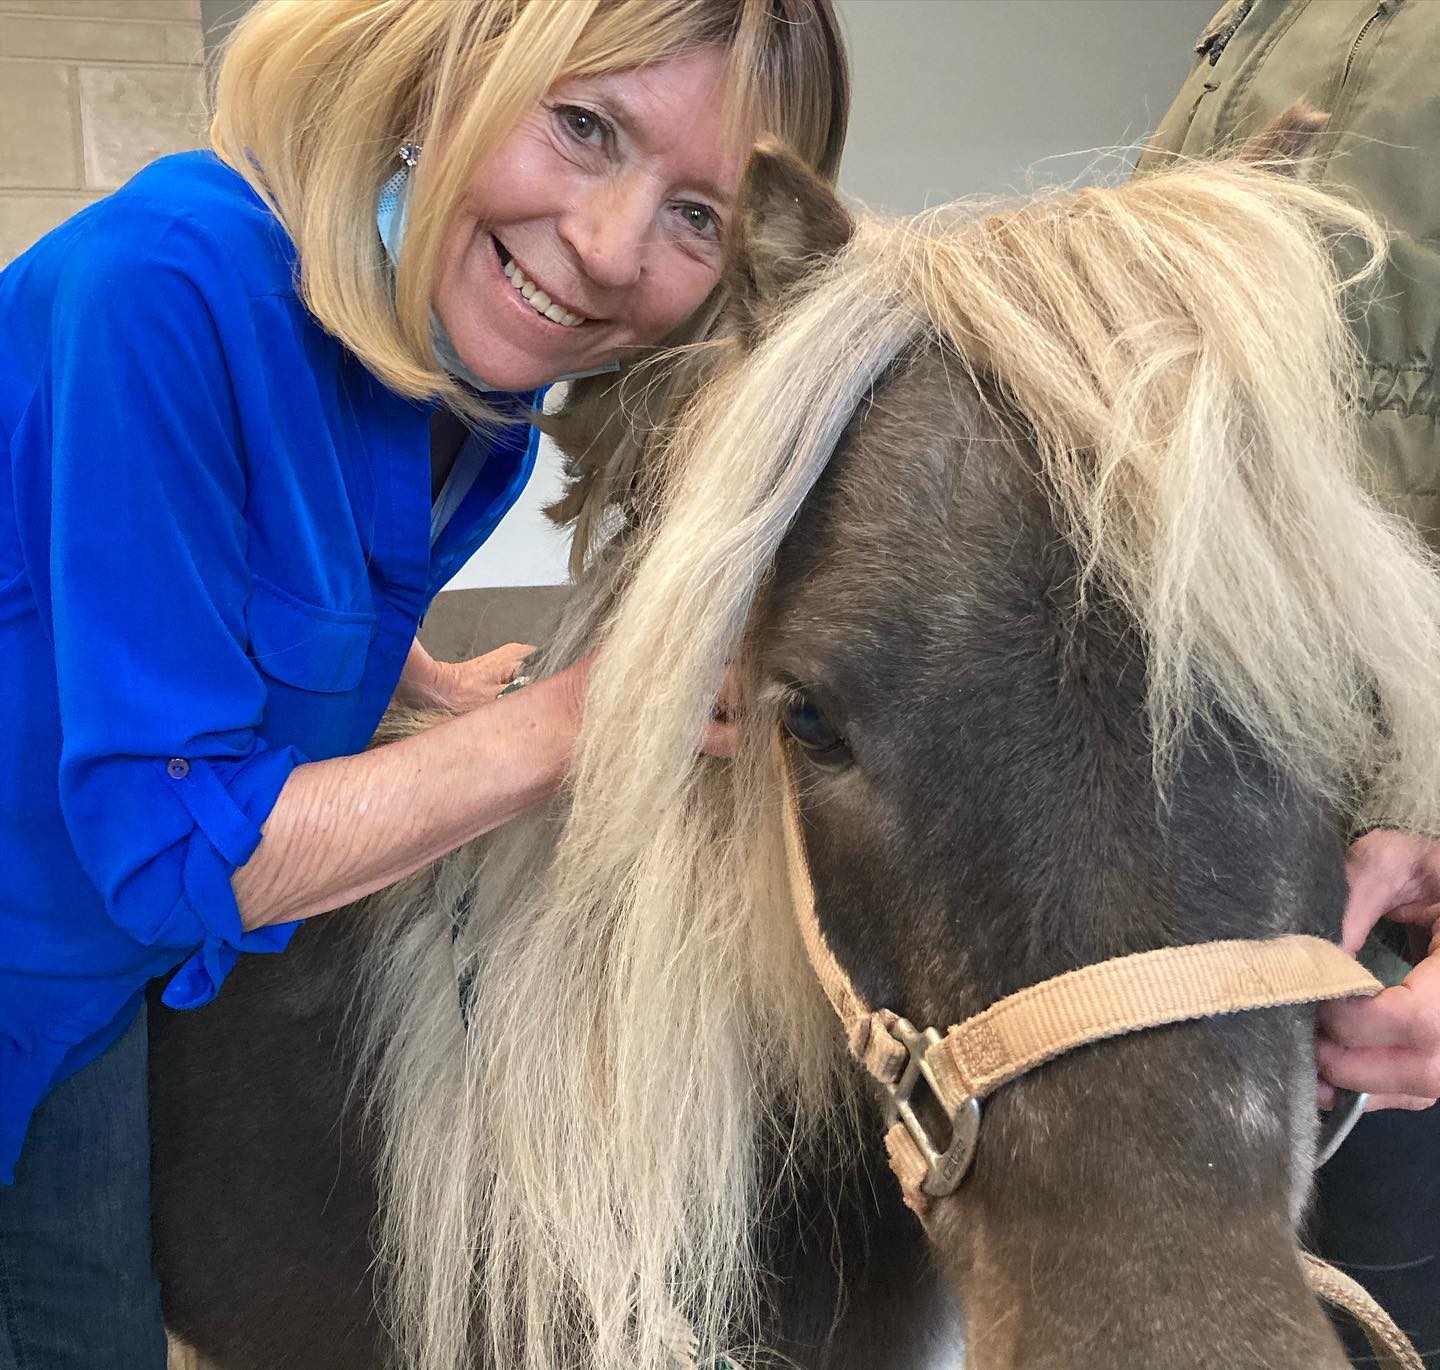 woman in blue shirt smiles while posing with a pony